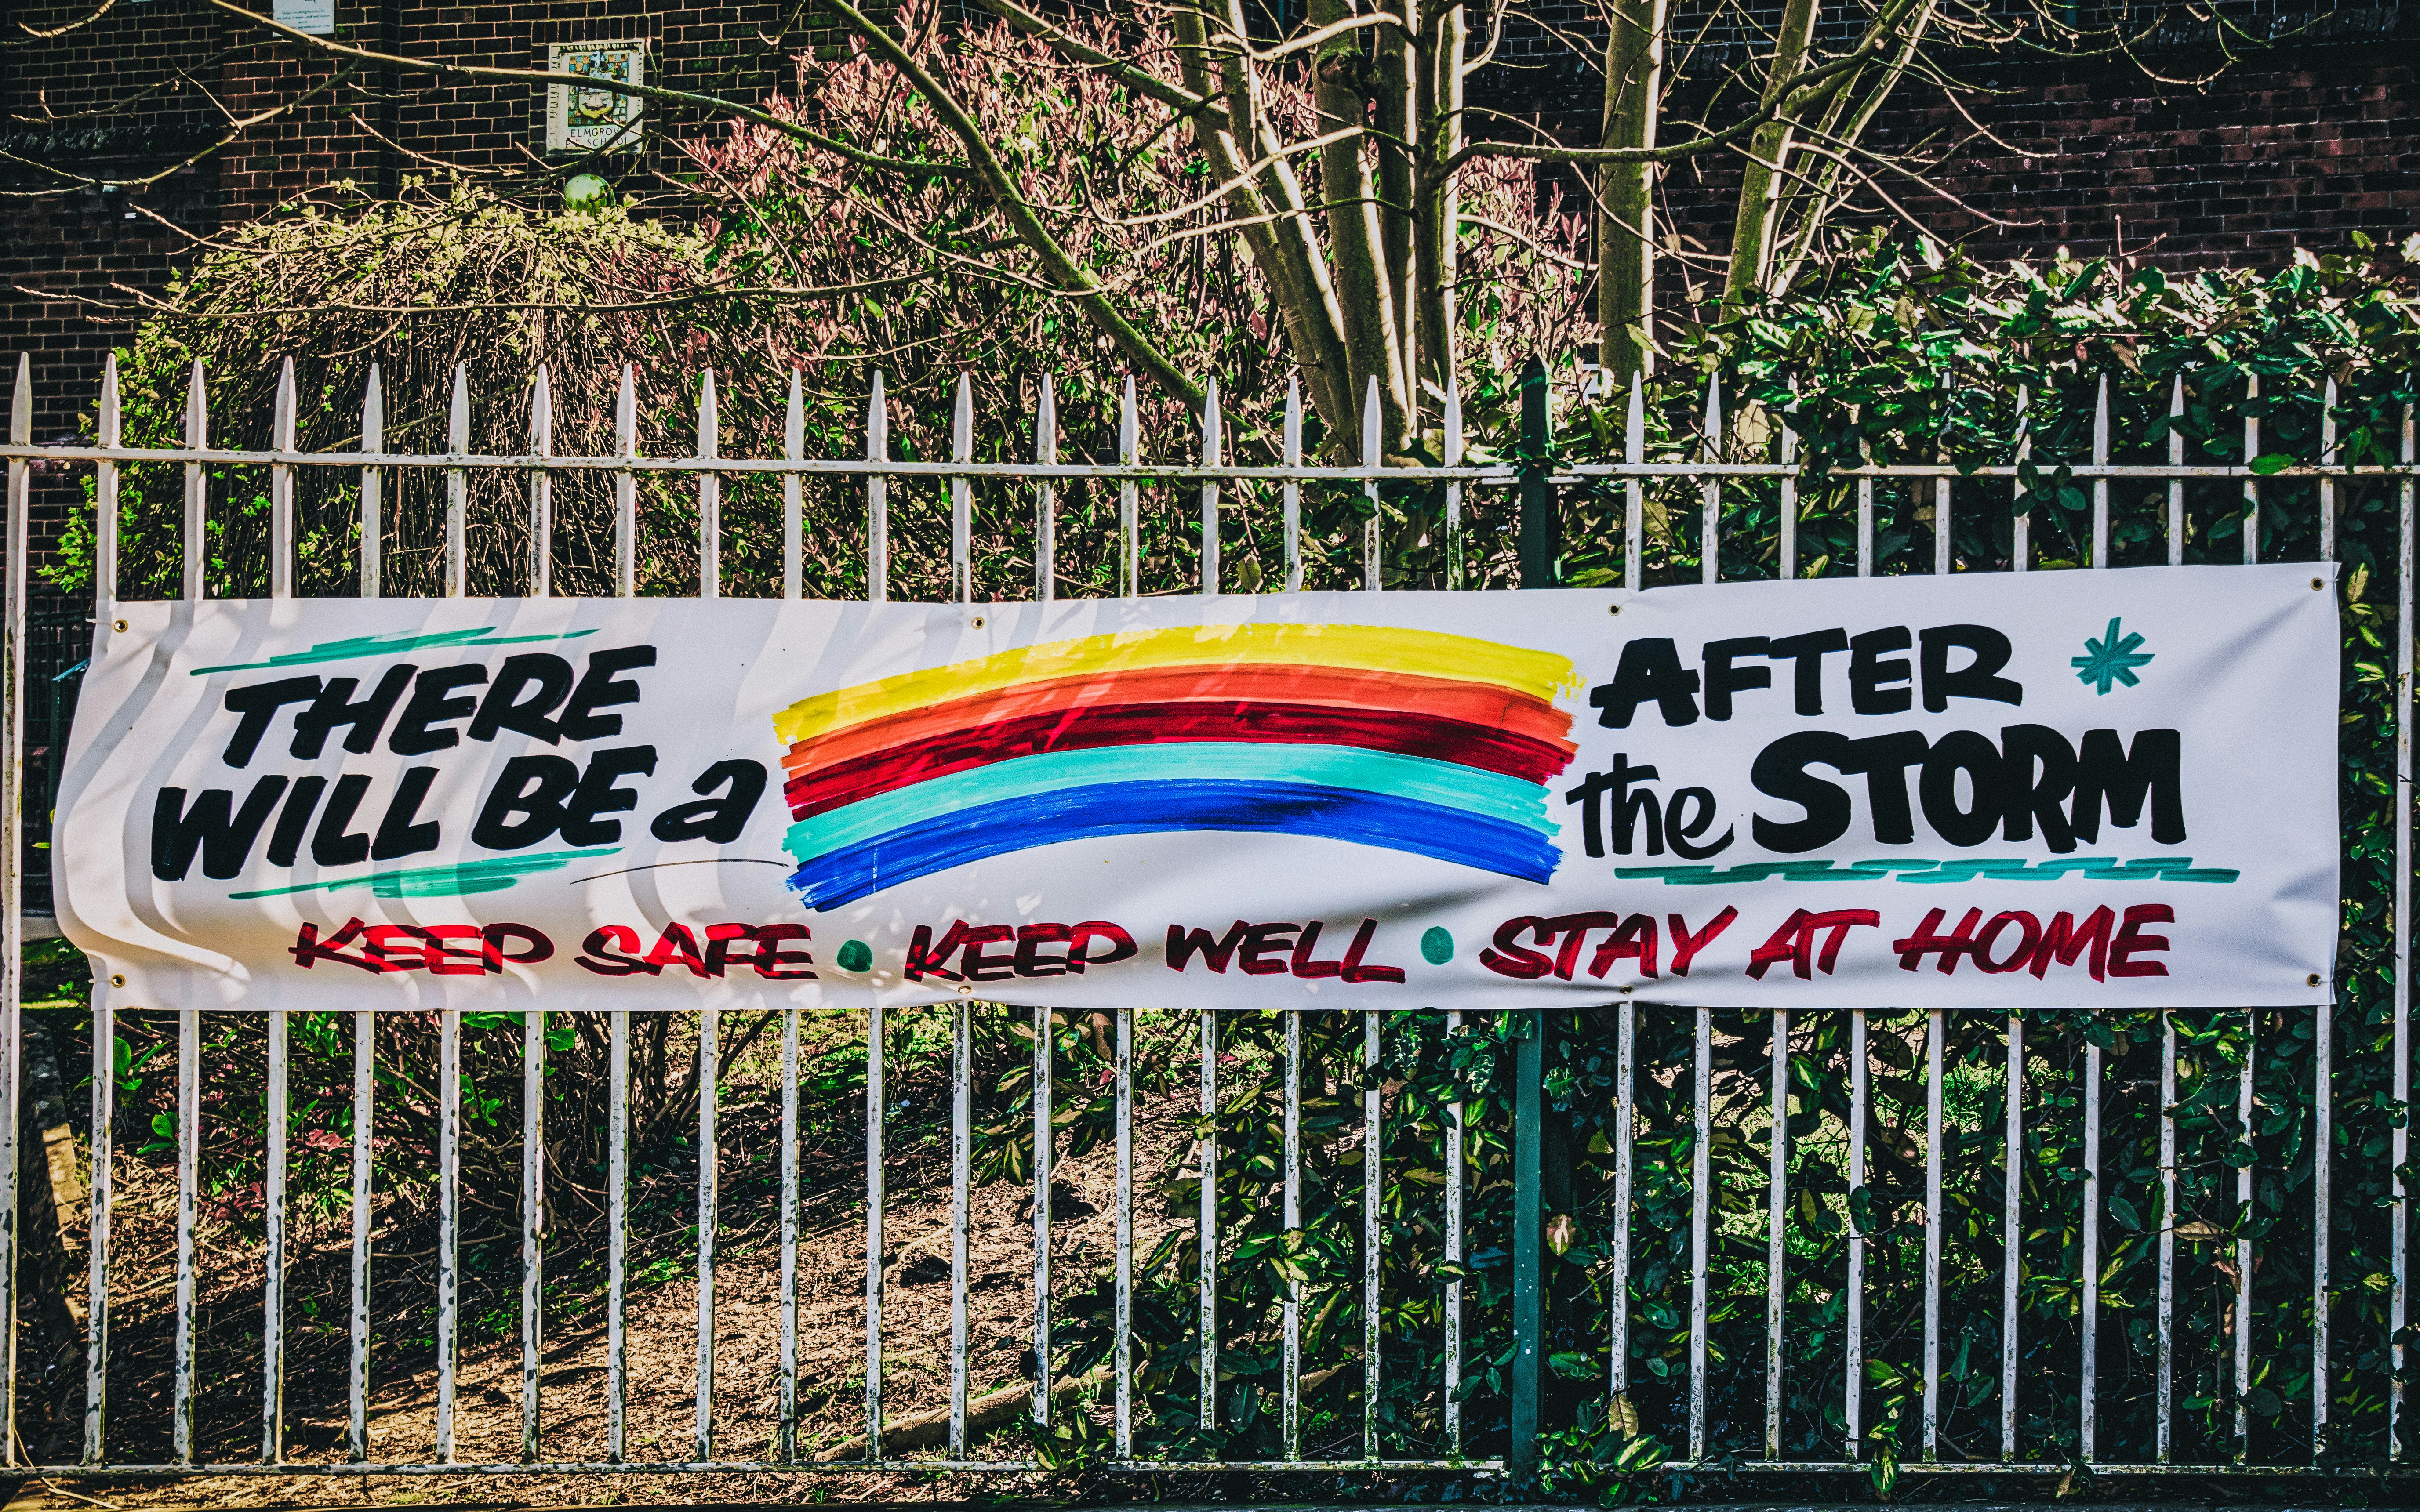 Sign displayed on the gates of Elmgrove Primary School regarding the Covid-19 pandemic. I find it interesting that the rainbow has become the symbol of hope for this global crisis given its mythological significance (i.e., Noah and the flood).